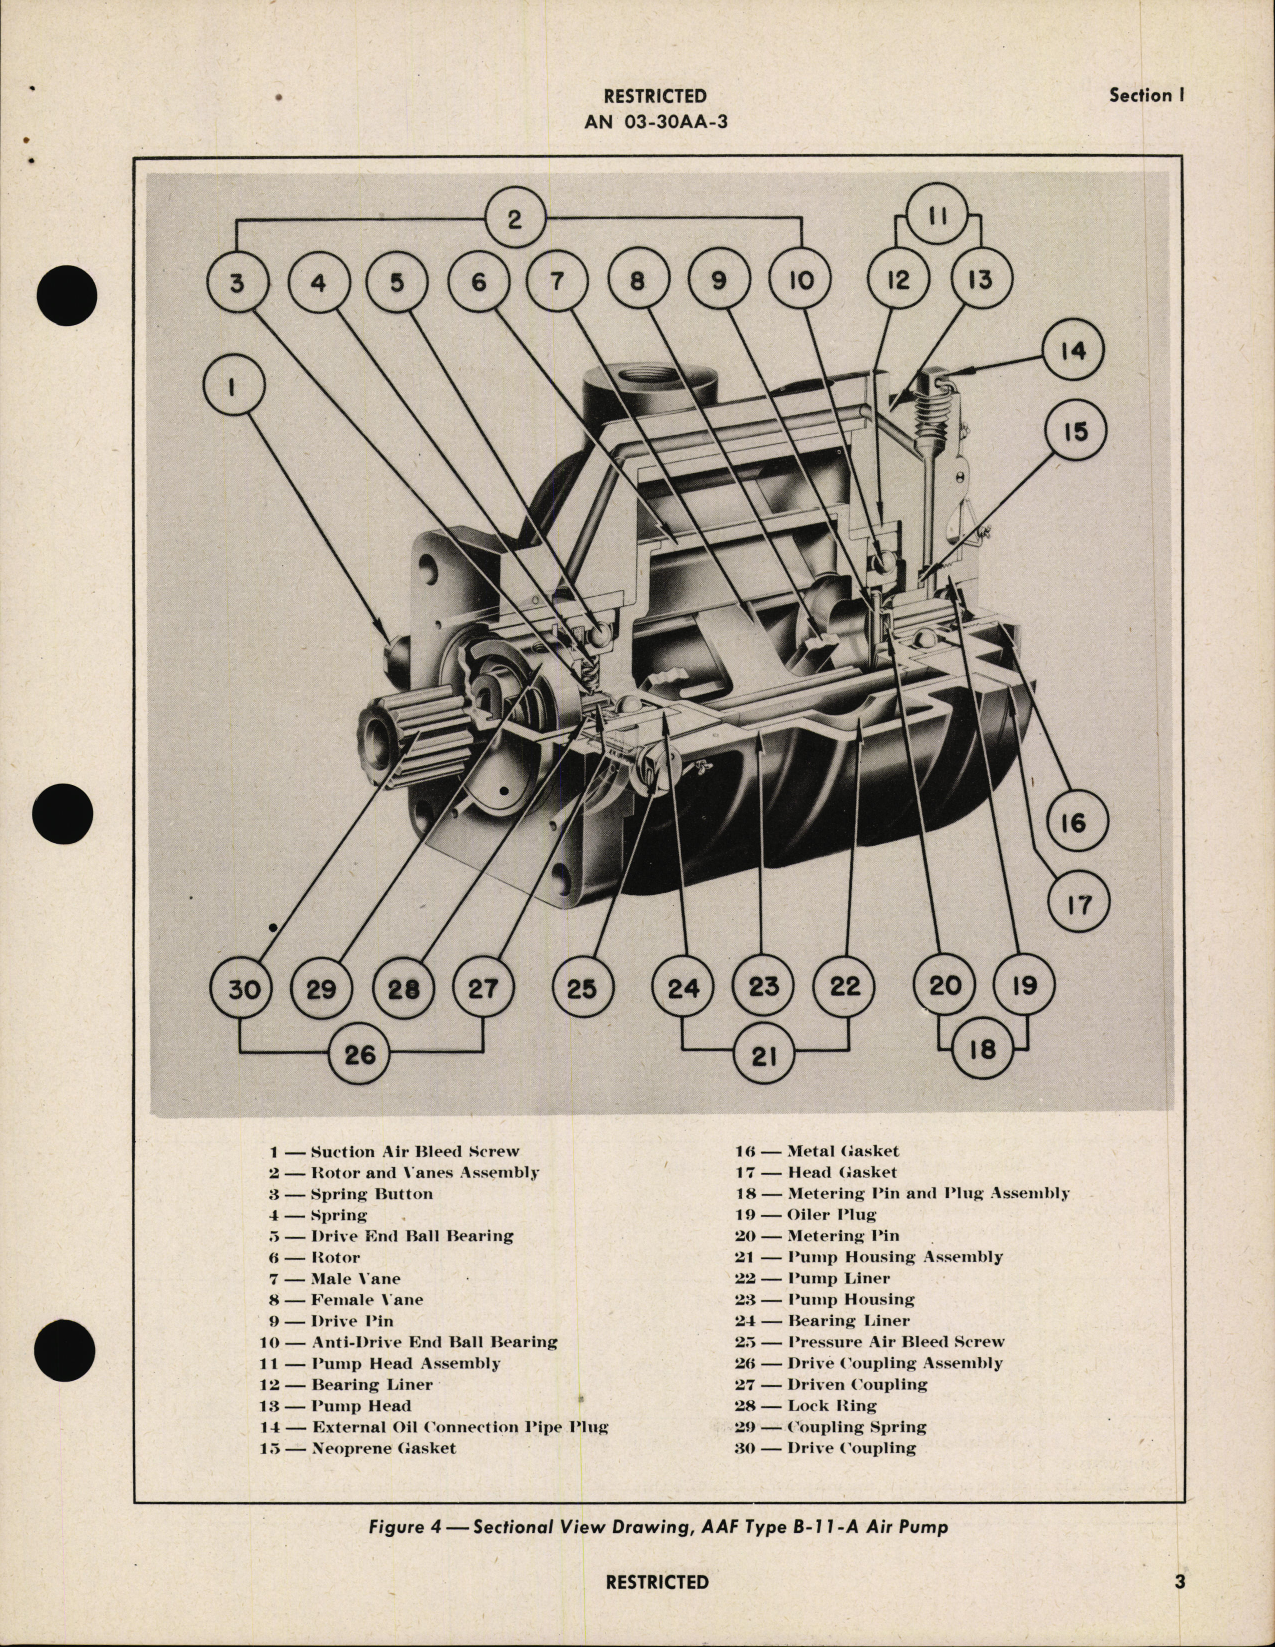 Sample page 7 from AirCorps Library document: Handbook of Instructions with Parts Catalog for Vane type Engine Driven Air Pump